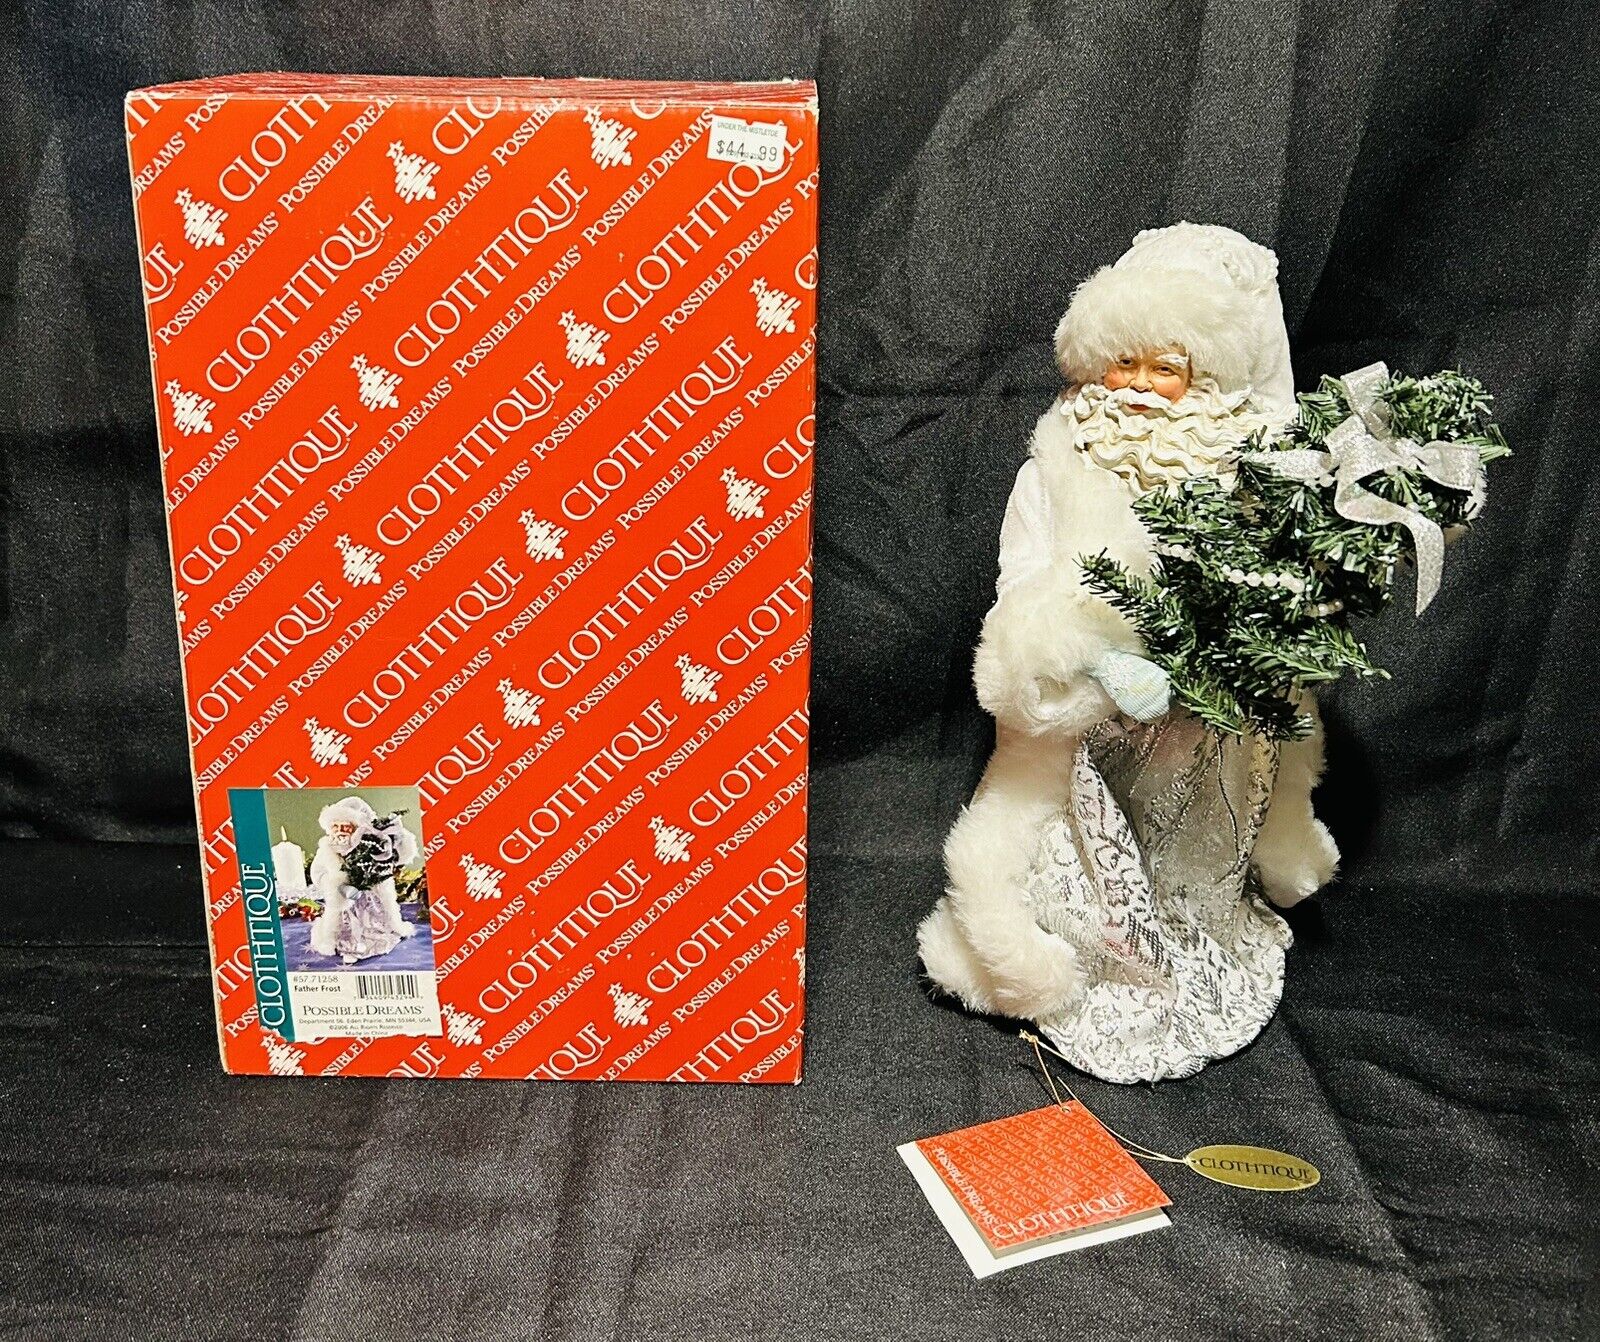 2006 Possible Dreams Father Frost Santa Figure by Clothtique Department 56 w/Box